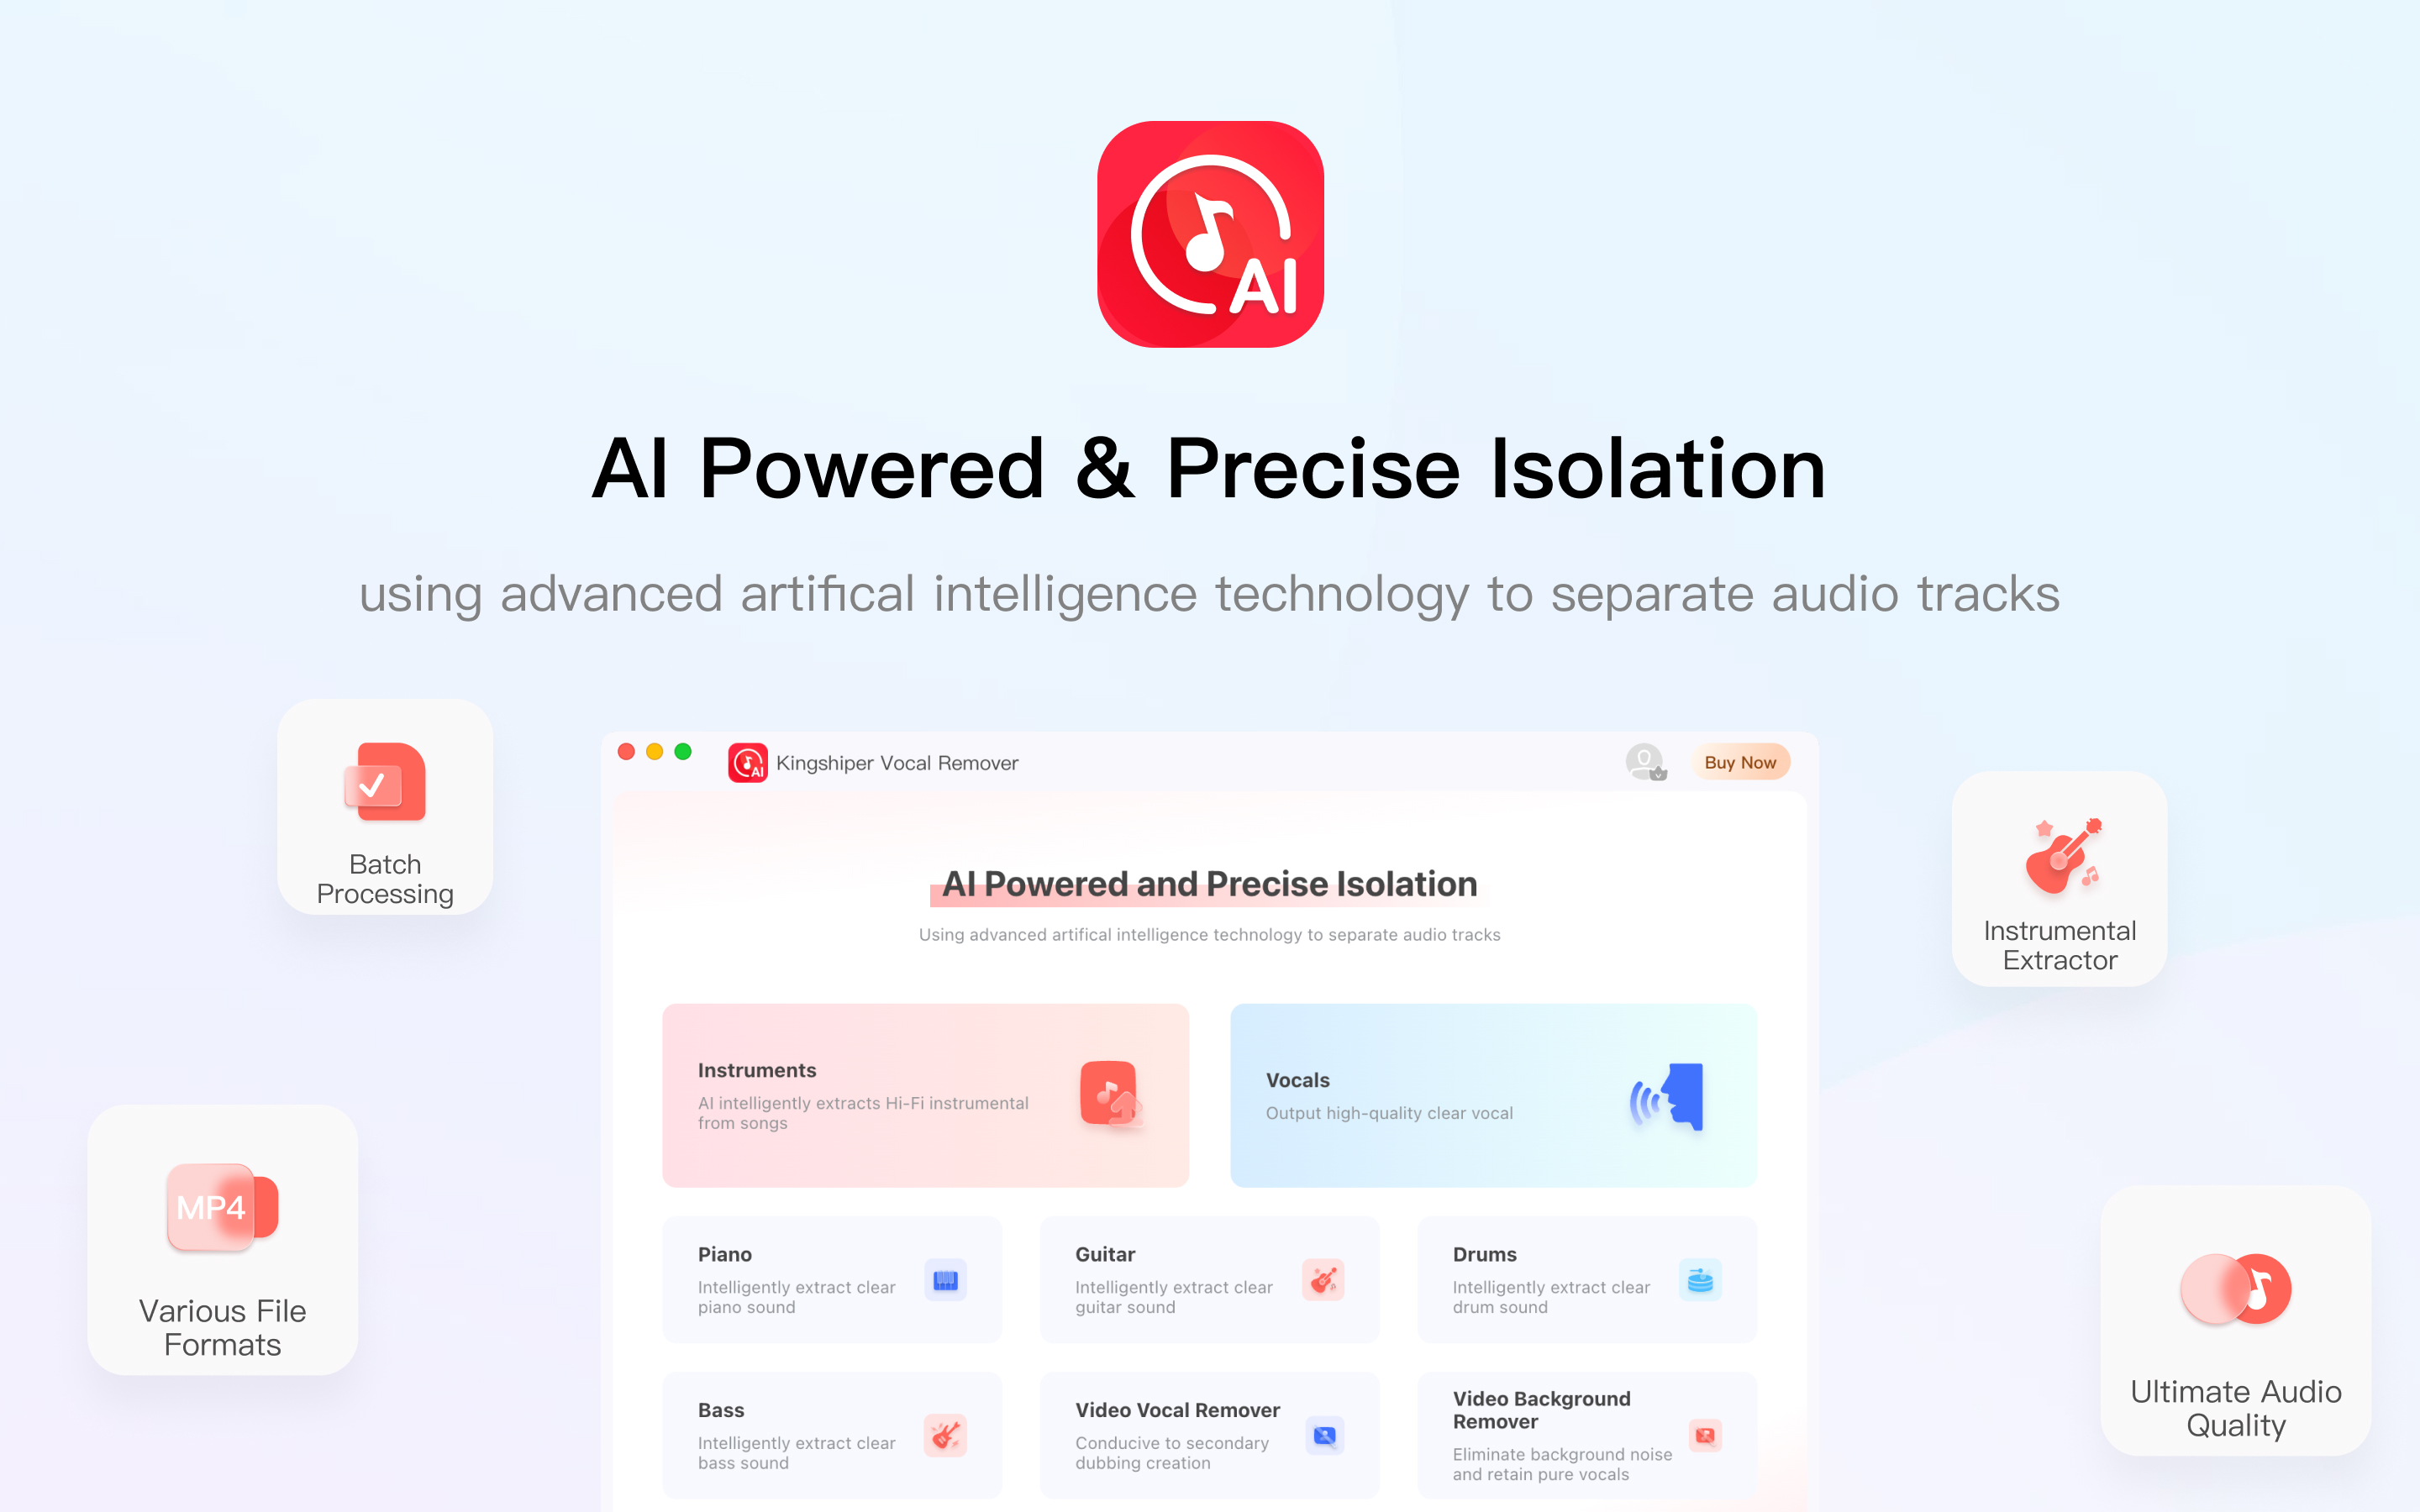 Kingshiper Vocal Remover AI Powered & Precise Isolation